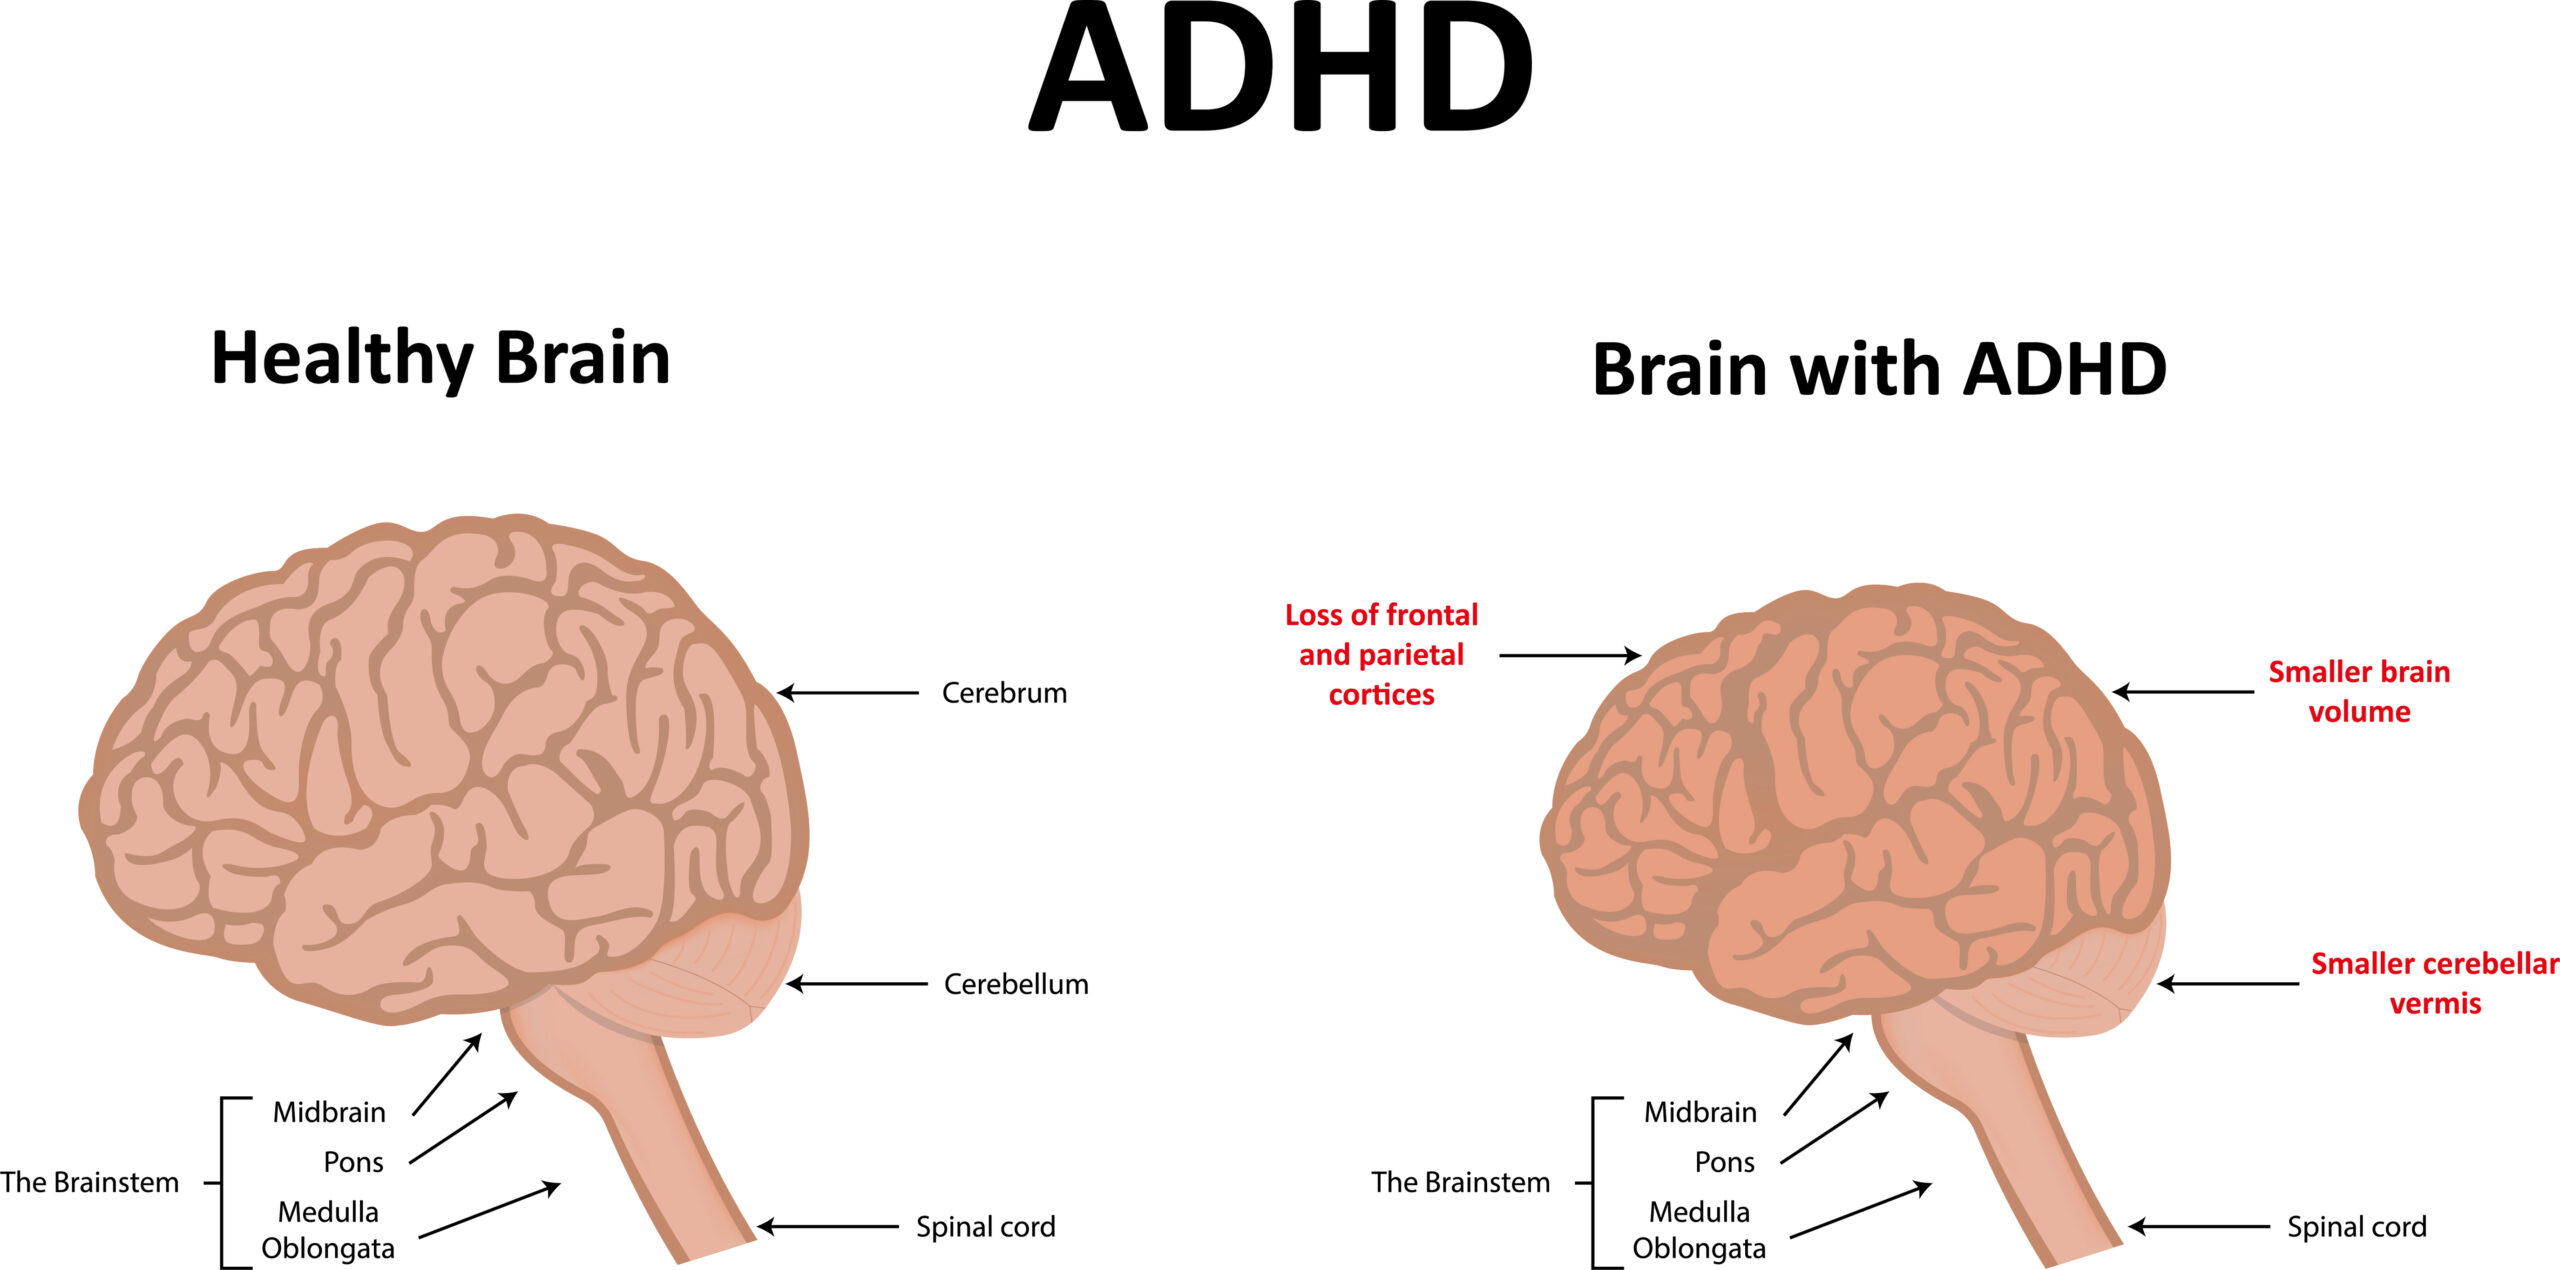 Illustration showing the differences between a healthy brain and a brain with ADHD.